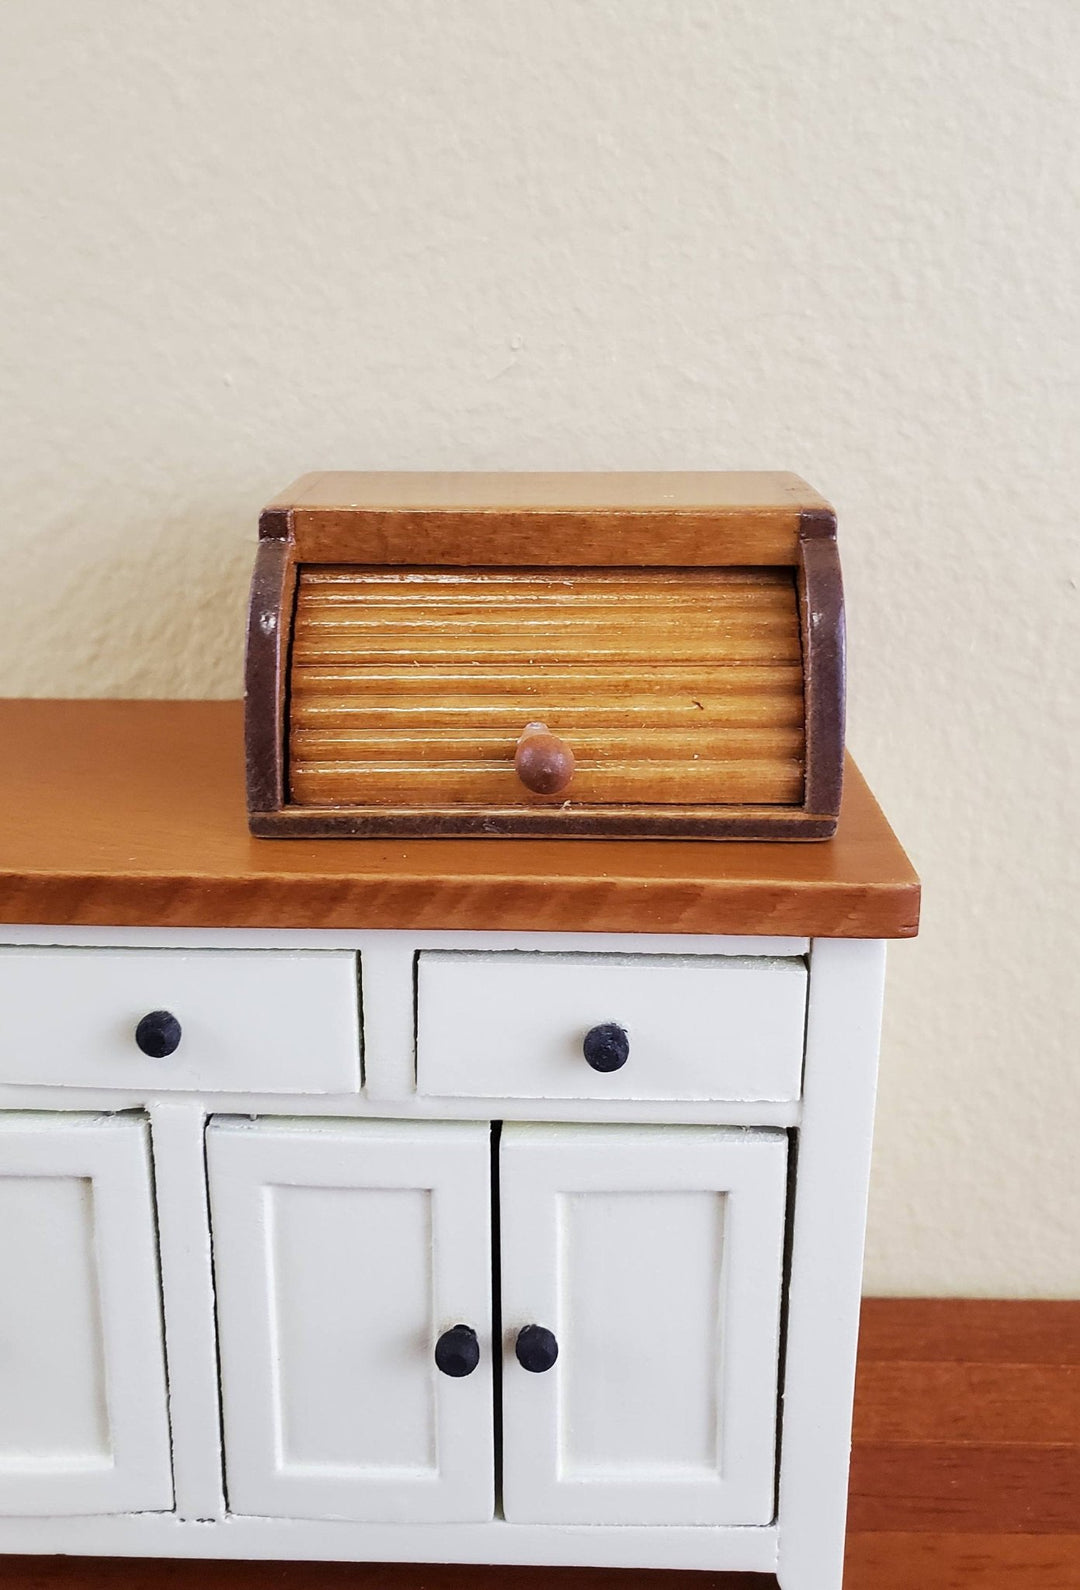 Dollhouse Miniature Bread Box with Opening Door Wood 1:12 Scale - Miniature Crush